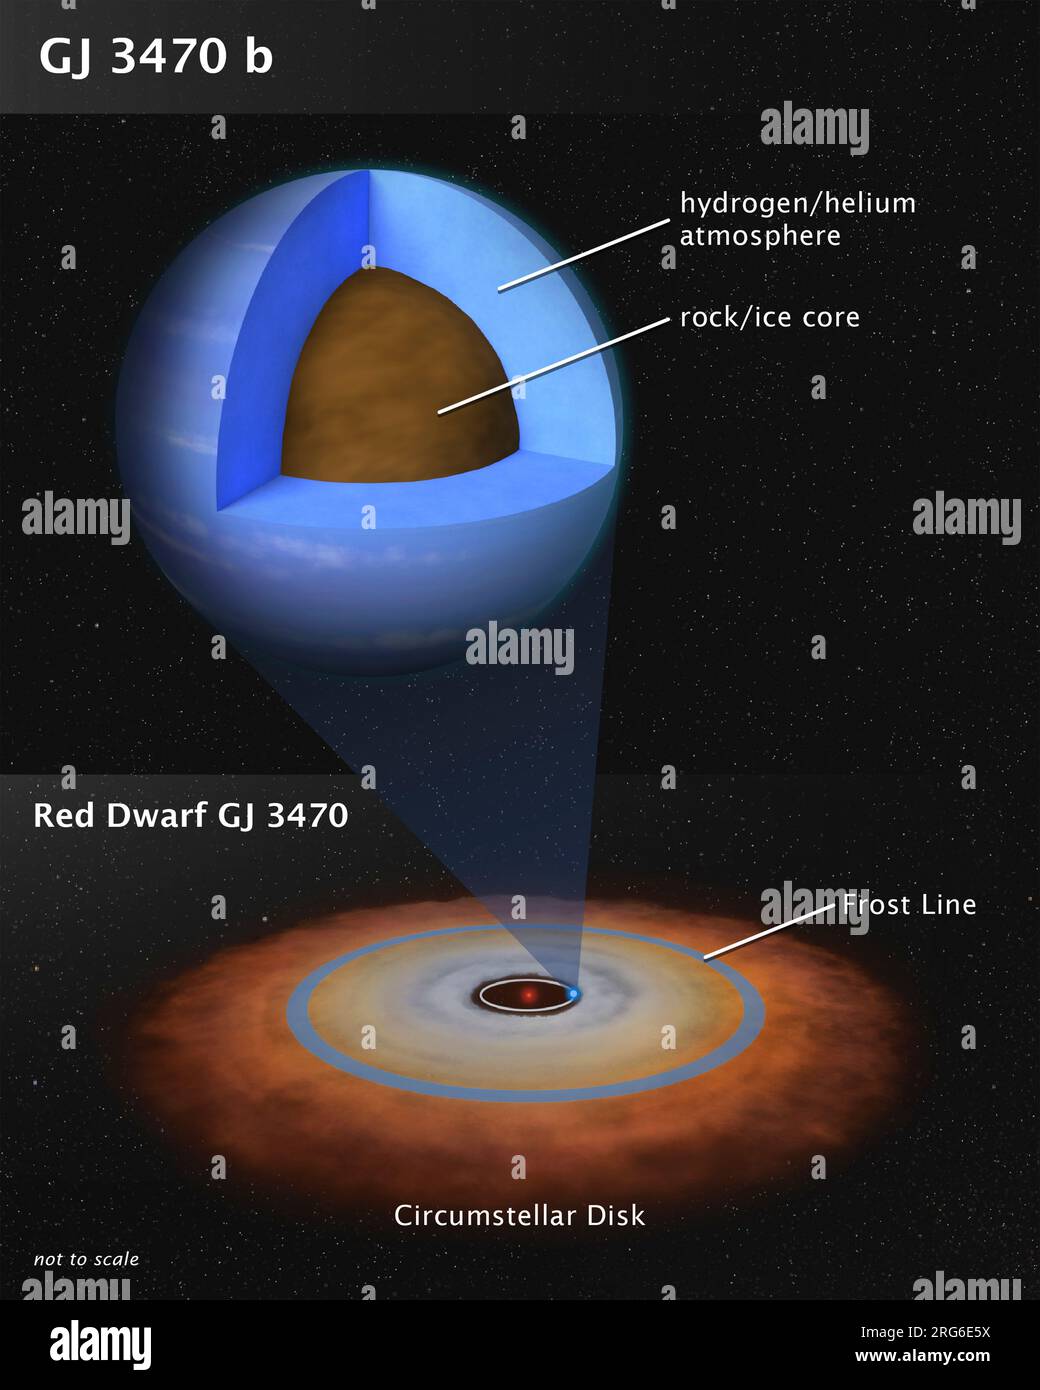 Illustration showing the theoretical internal structure of the exoplanet GJ 3470 b. Stock Photo